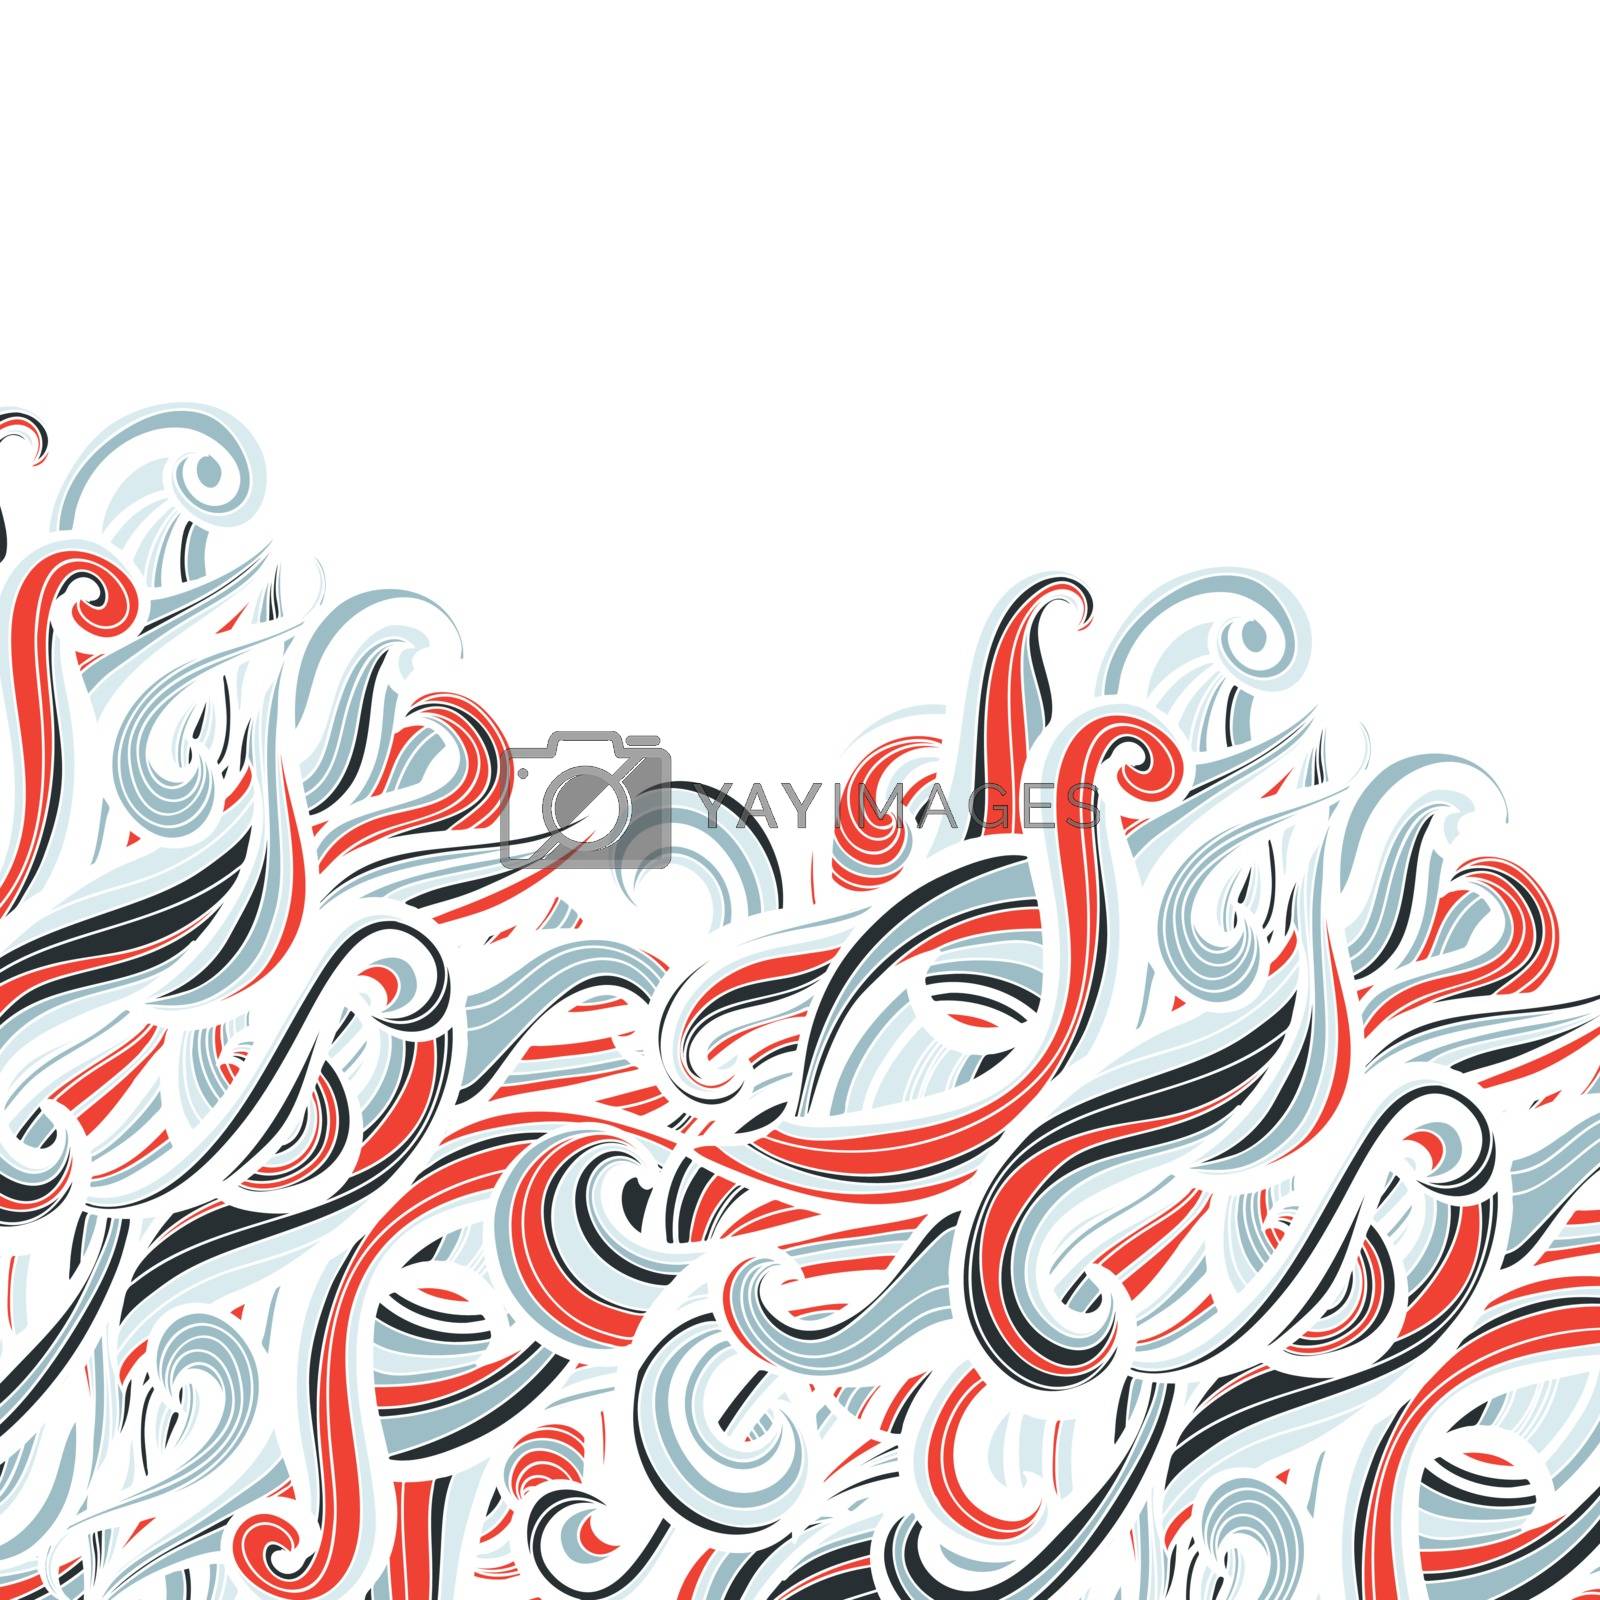 Royalty free image of Curl abstract pattern with multicolored waves. Vector illustration by AlisaRed